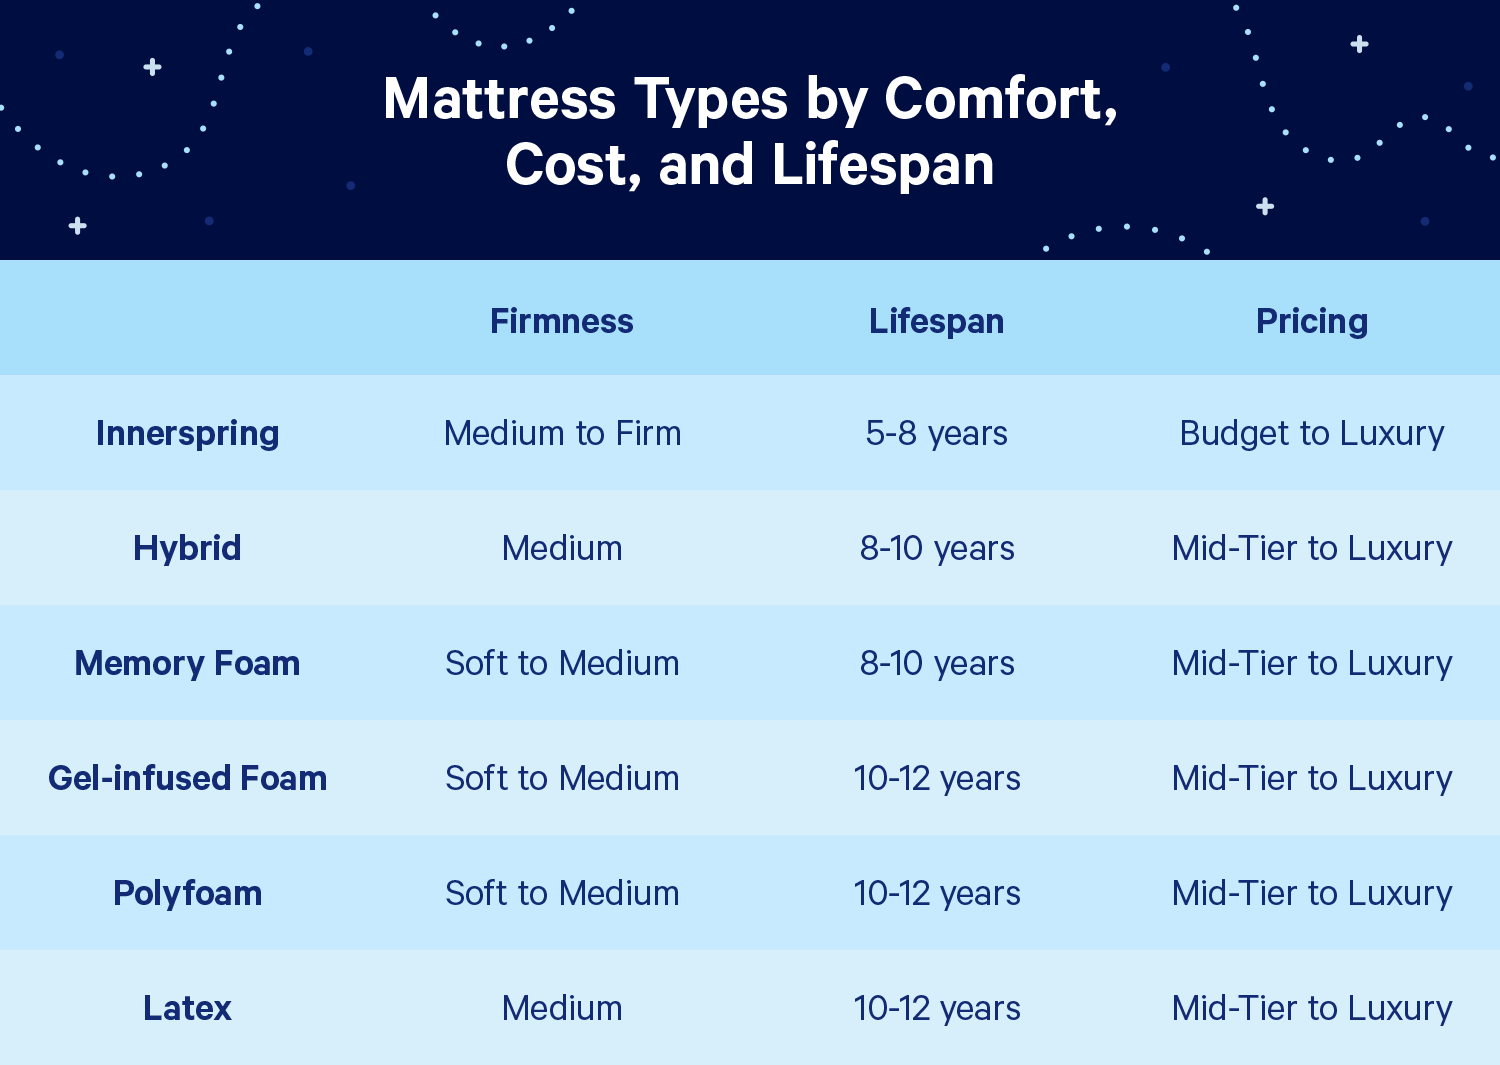 Comparison Of Prices With Other Mattresses